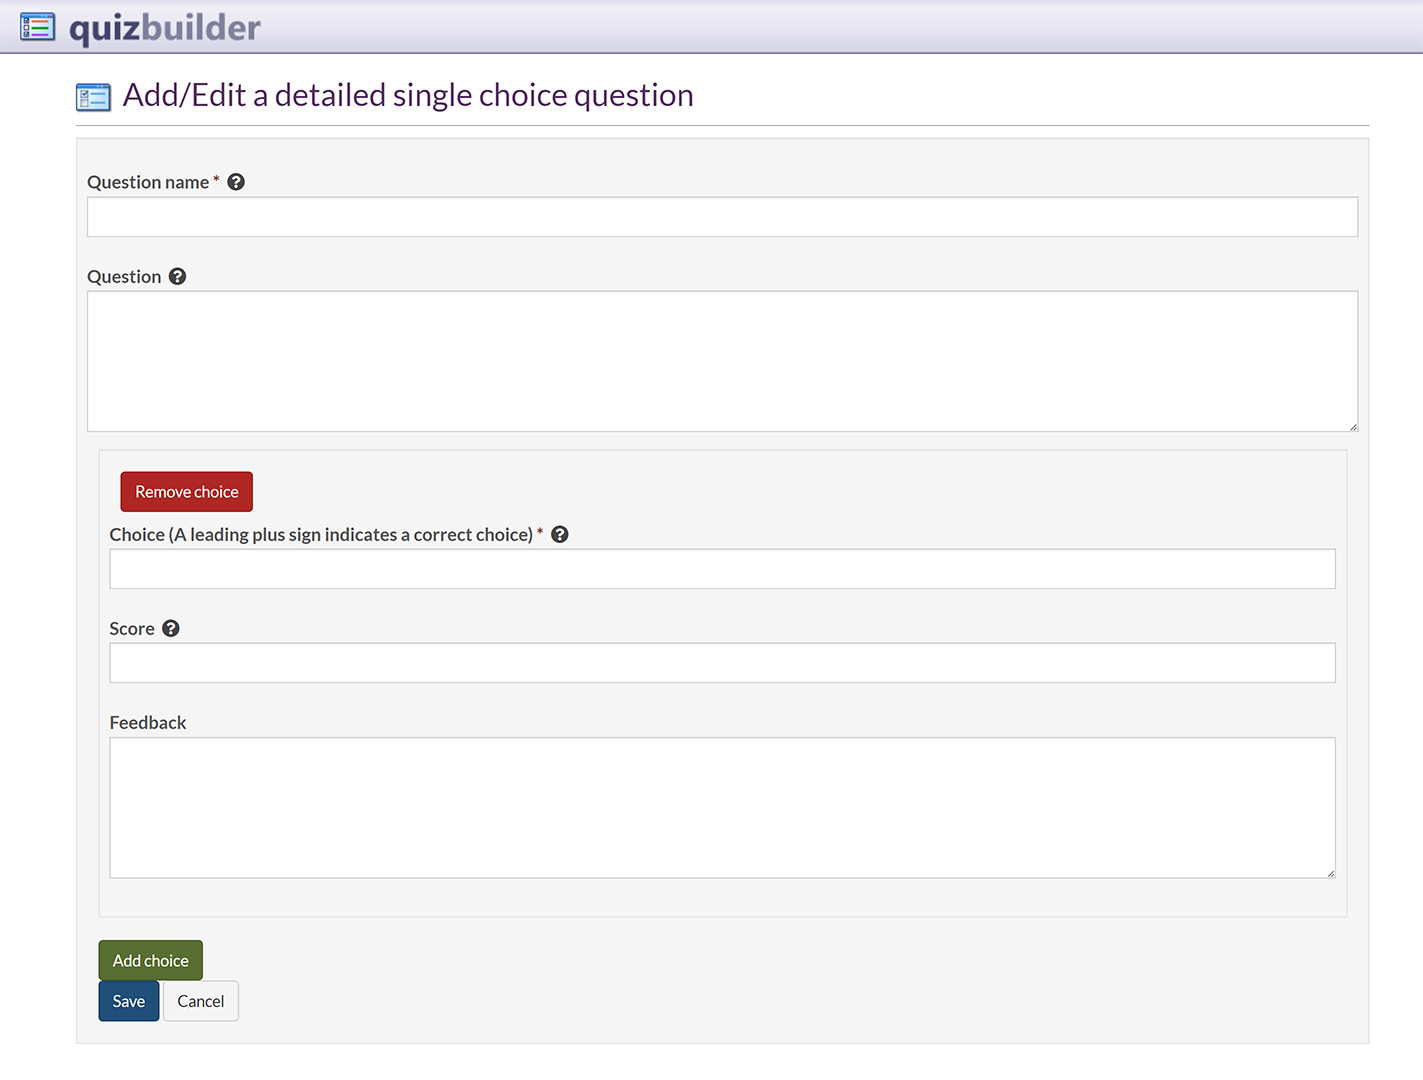 The 'Add/Edit a detailed single choice question' screen